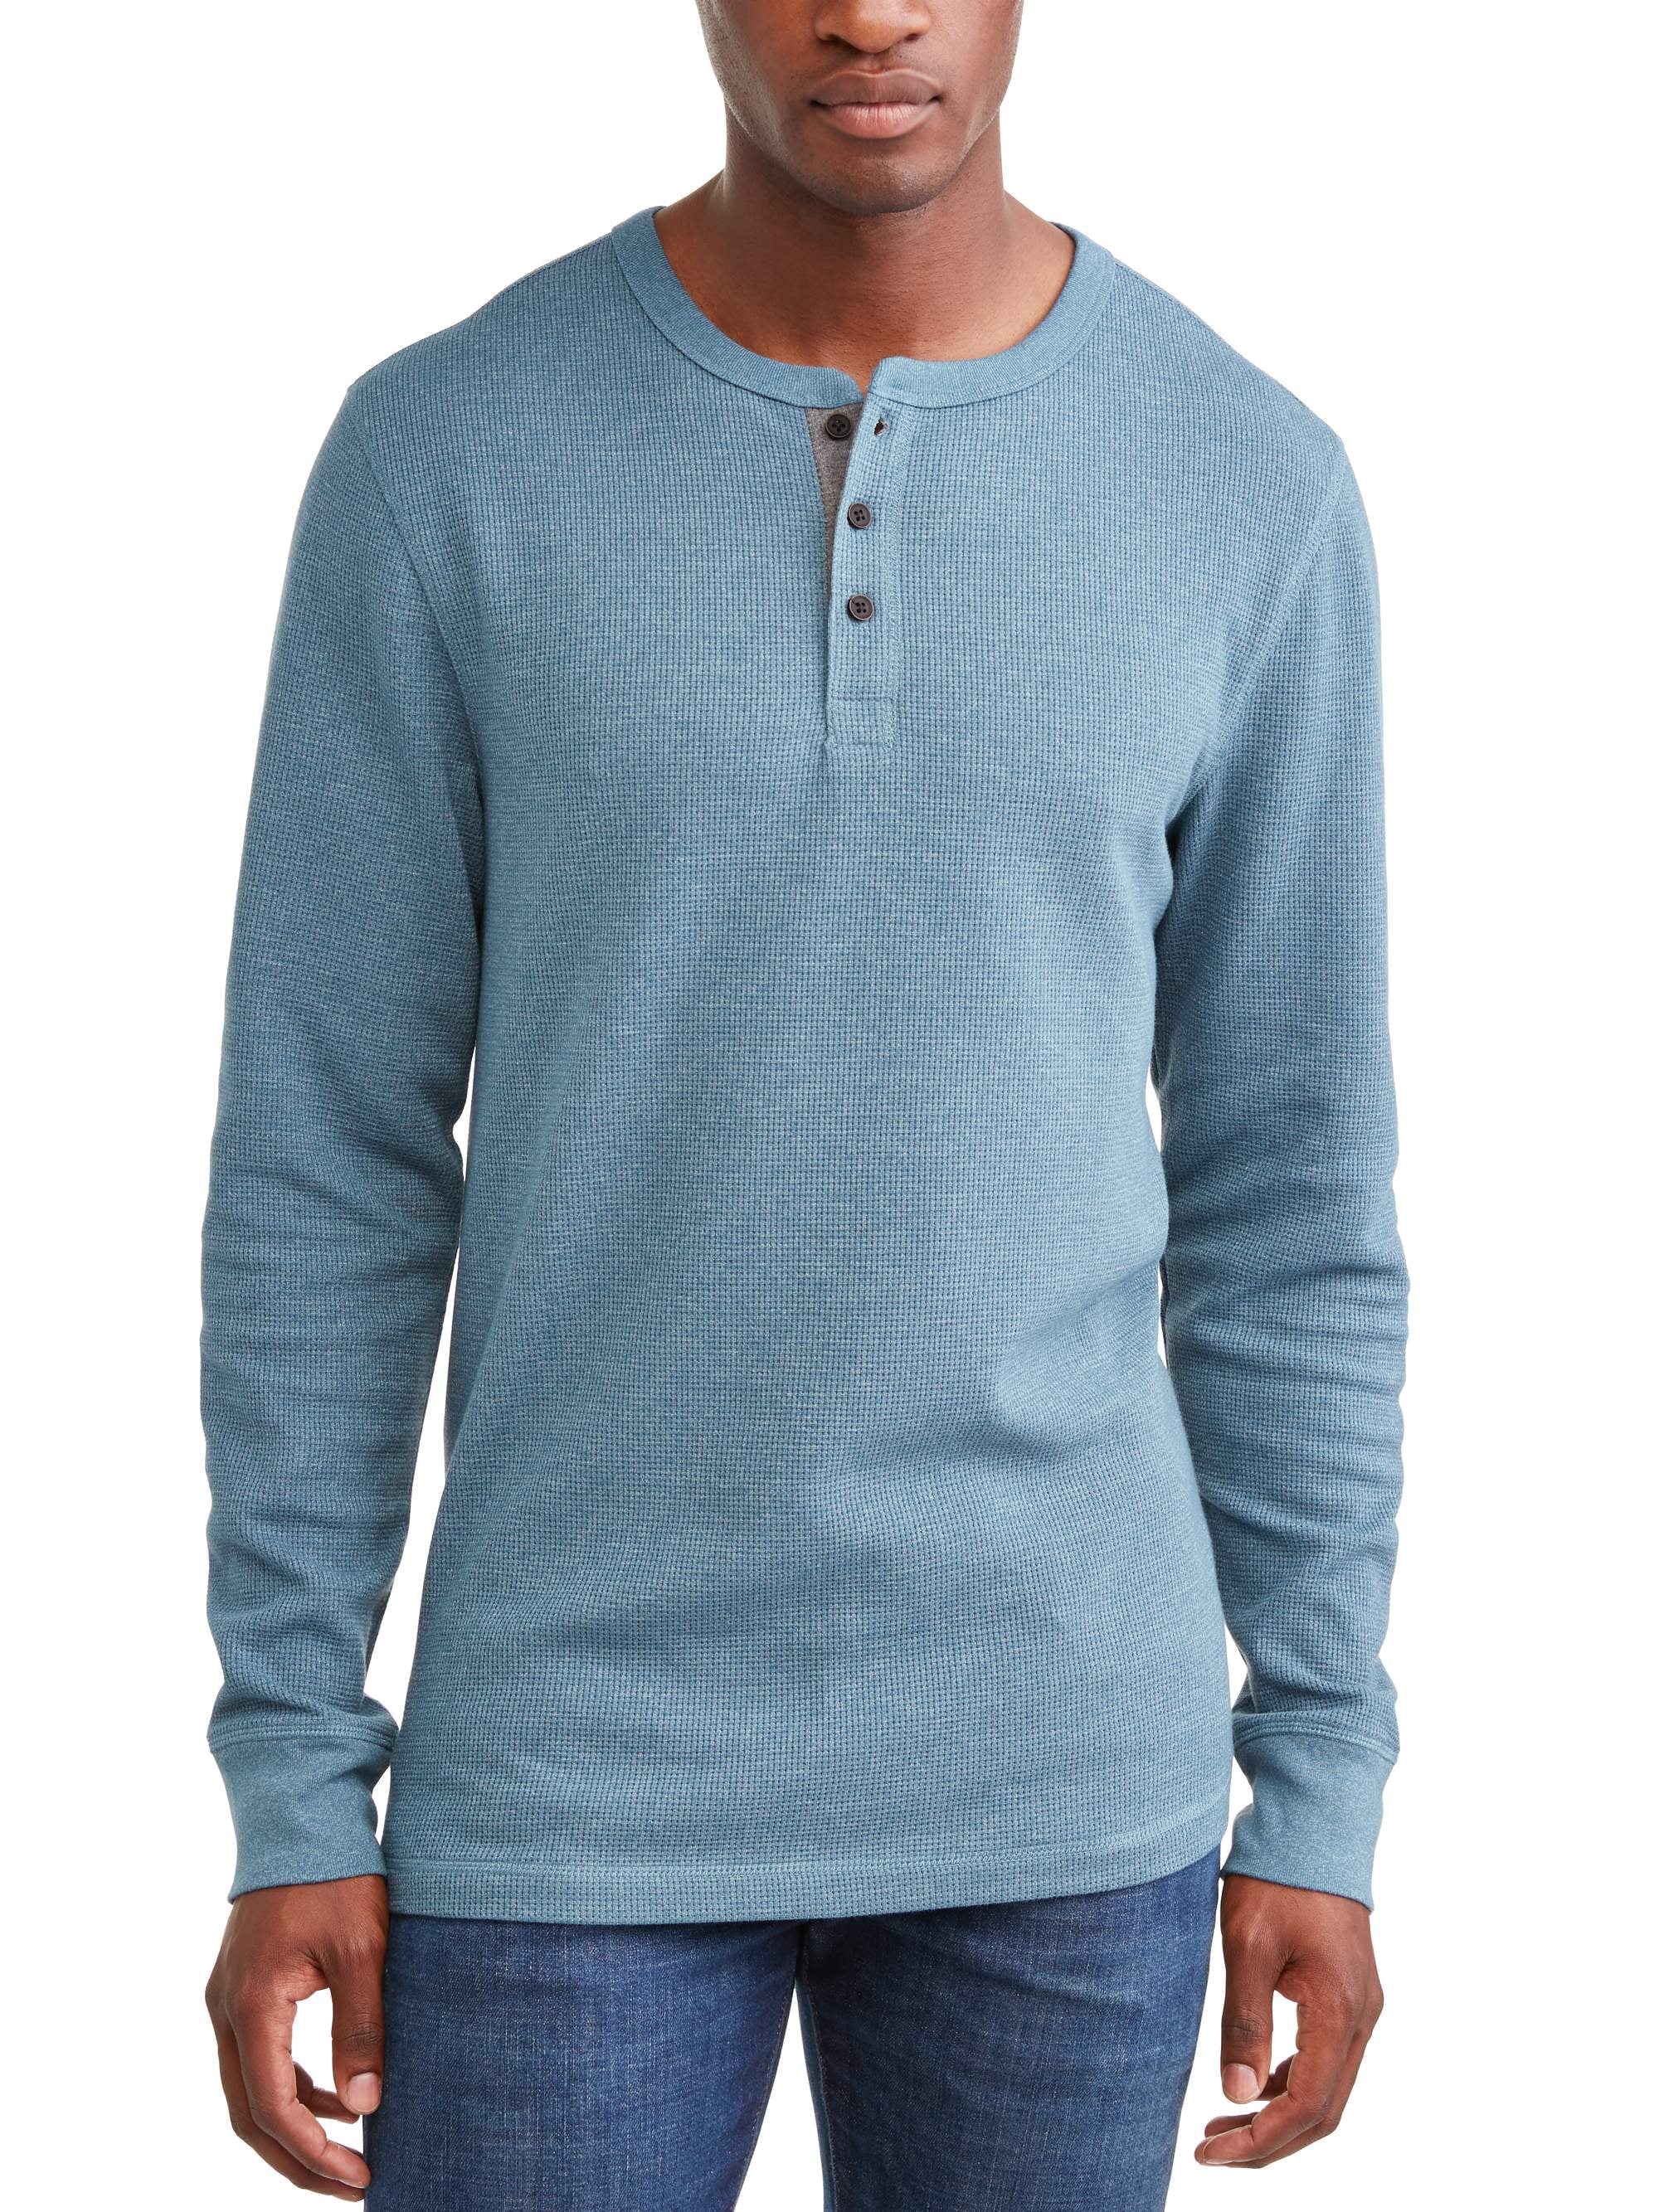 George Men's Long Sleeve Thermal Henley, up to size 5XL - Walmart.com